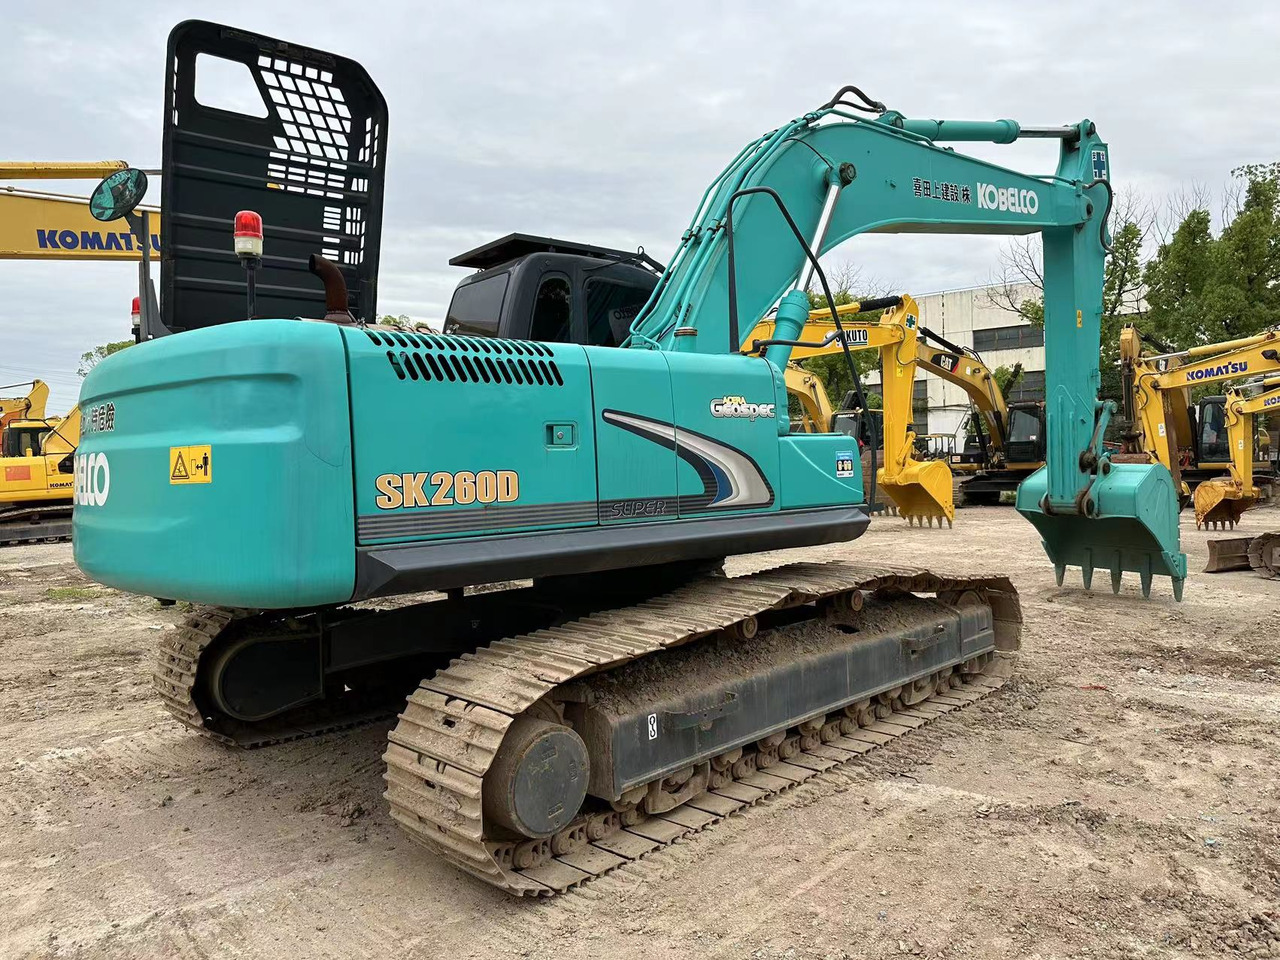 Crawler excavator KOBELCO 26 ton original used excavator SK260D, Large engineering construction machinery good condition low price for sale: picture 10